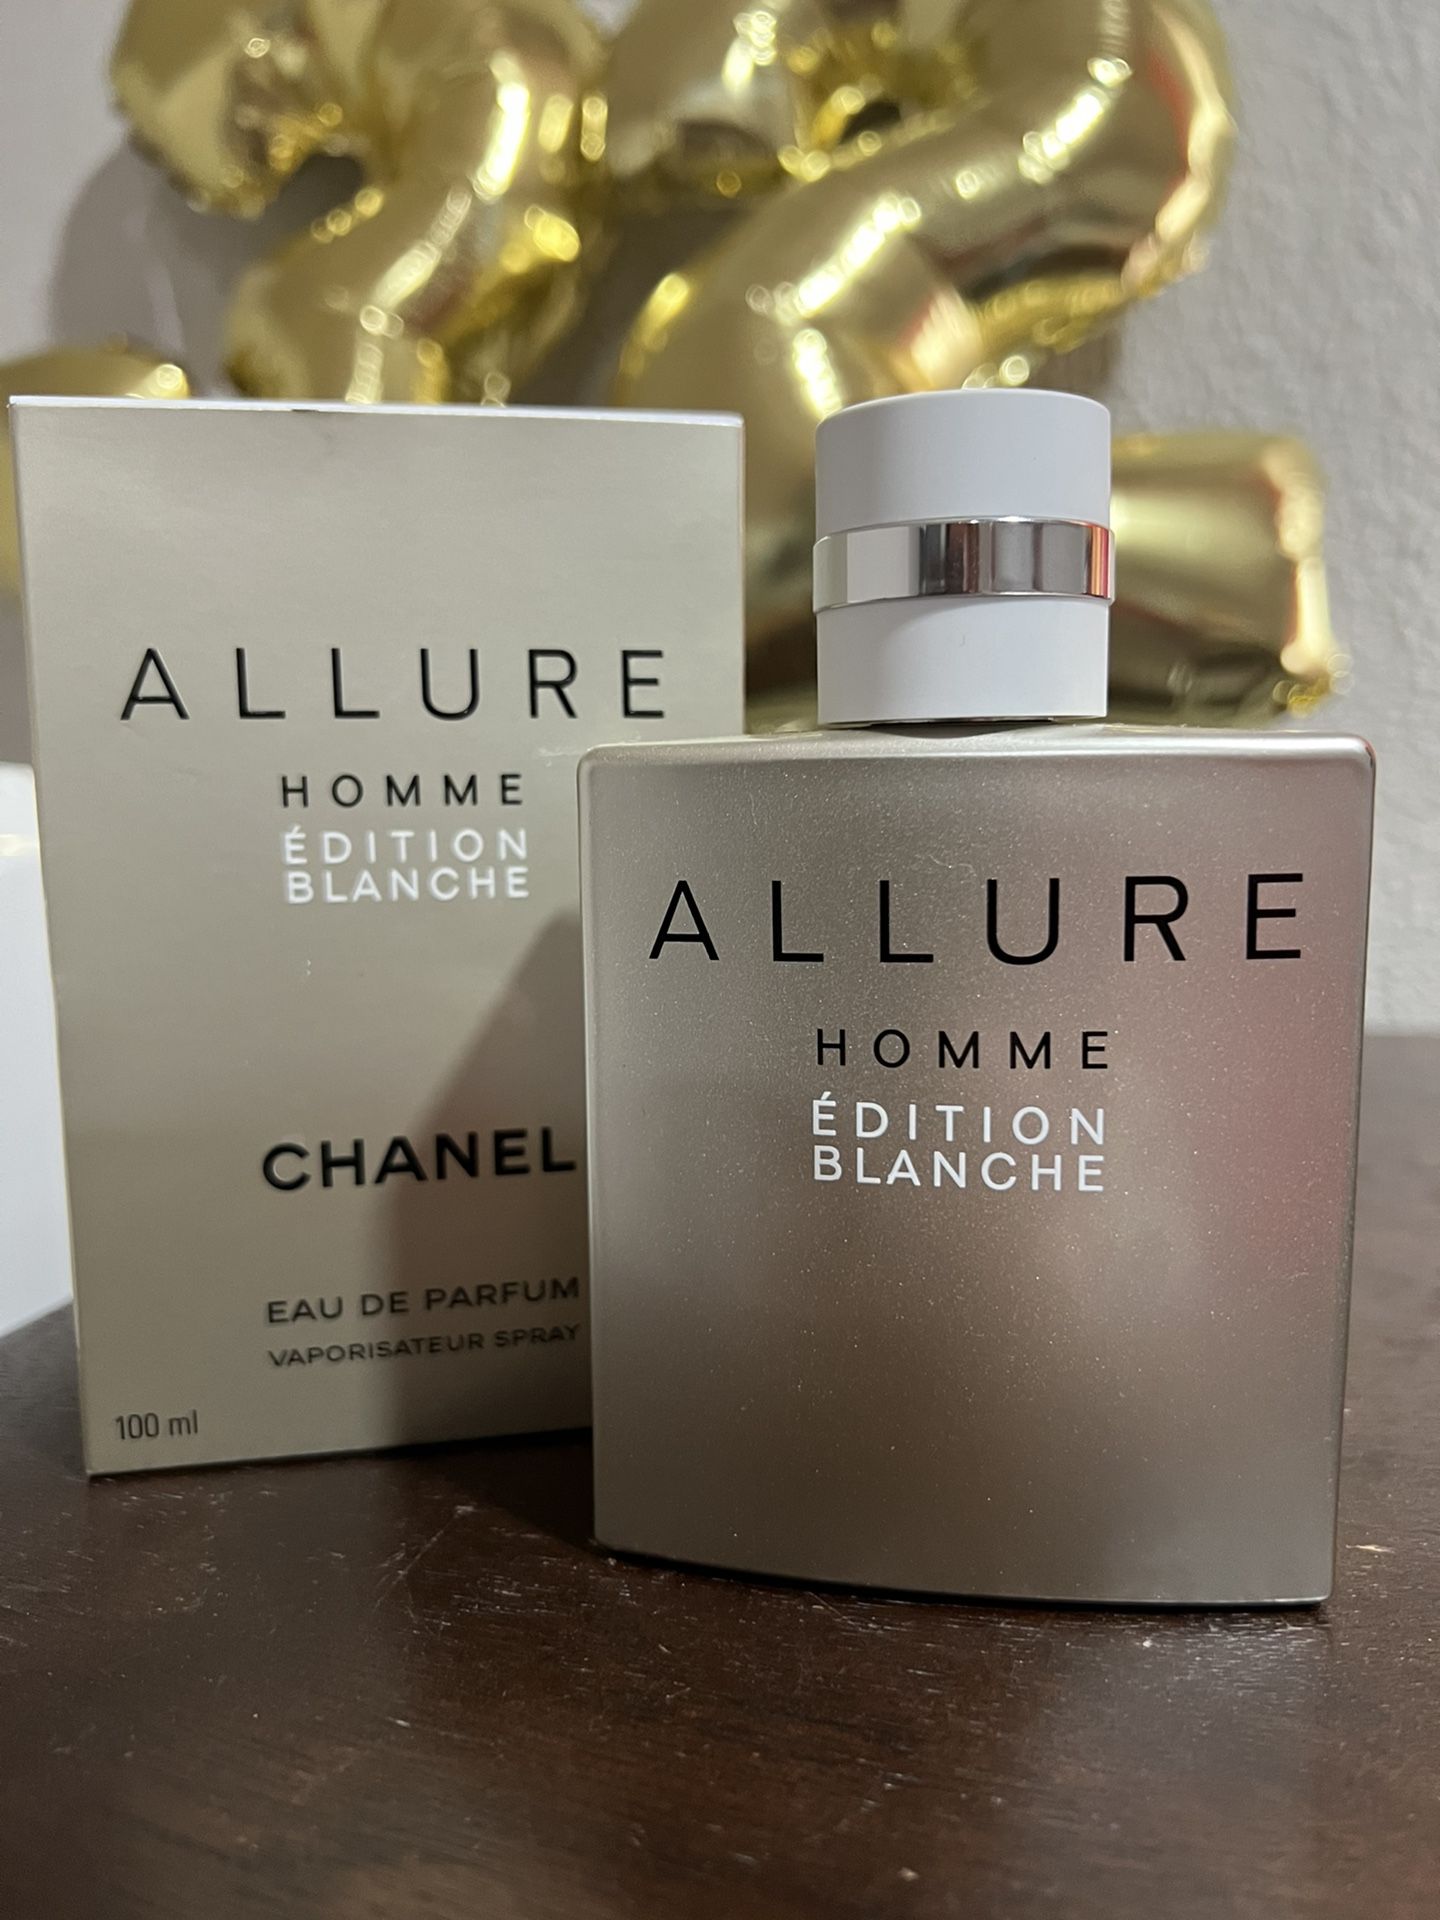 Chanel homme edition. Шанель Аллюр эдишн Бланш. Chanel Allure homme Edition Blanche 100ml.